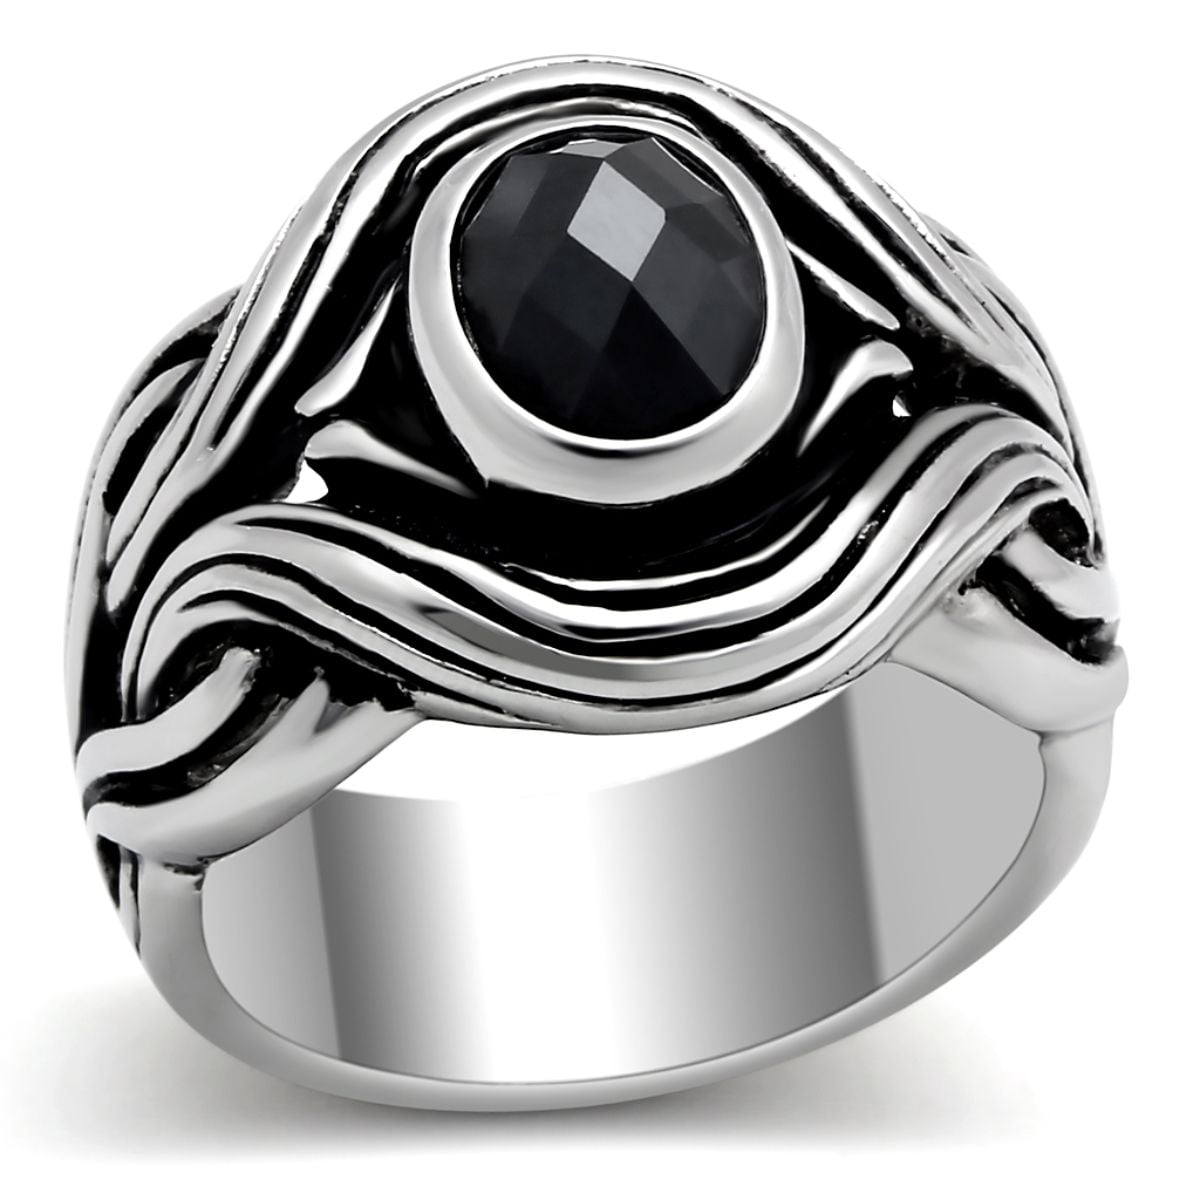 MEN'S PRINCESS CUT JET BLACK CZ DOME STONE SILVER STAINLESS STEEL RING SIZE 8-13 